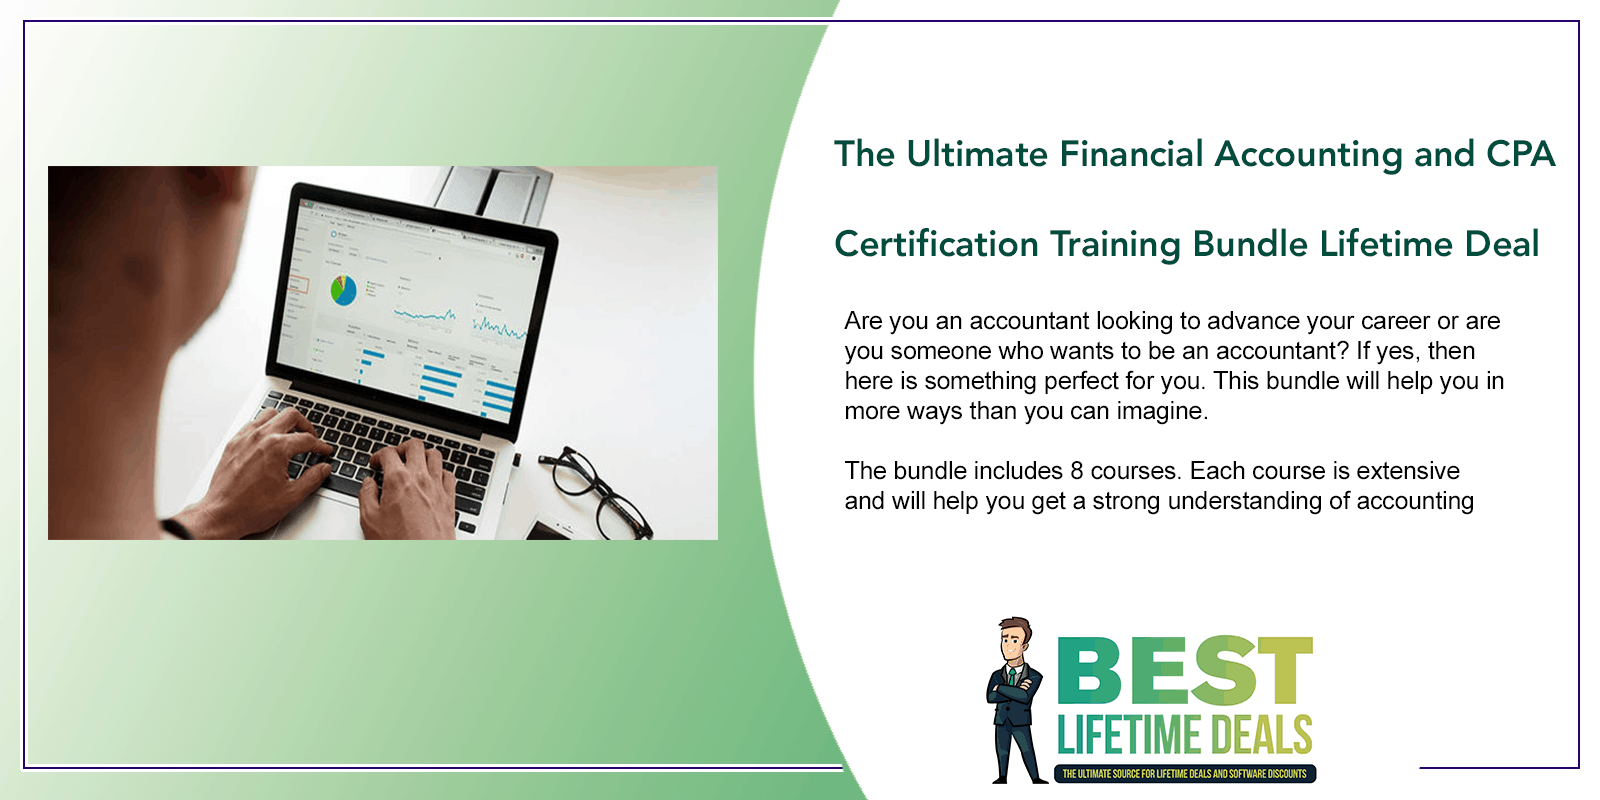 The Ultimate Financial Accounting and CPA Certification Featured Image